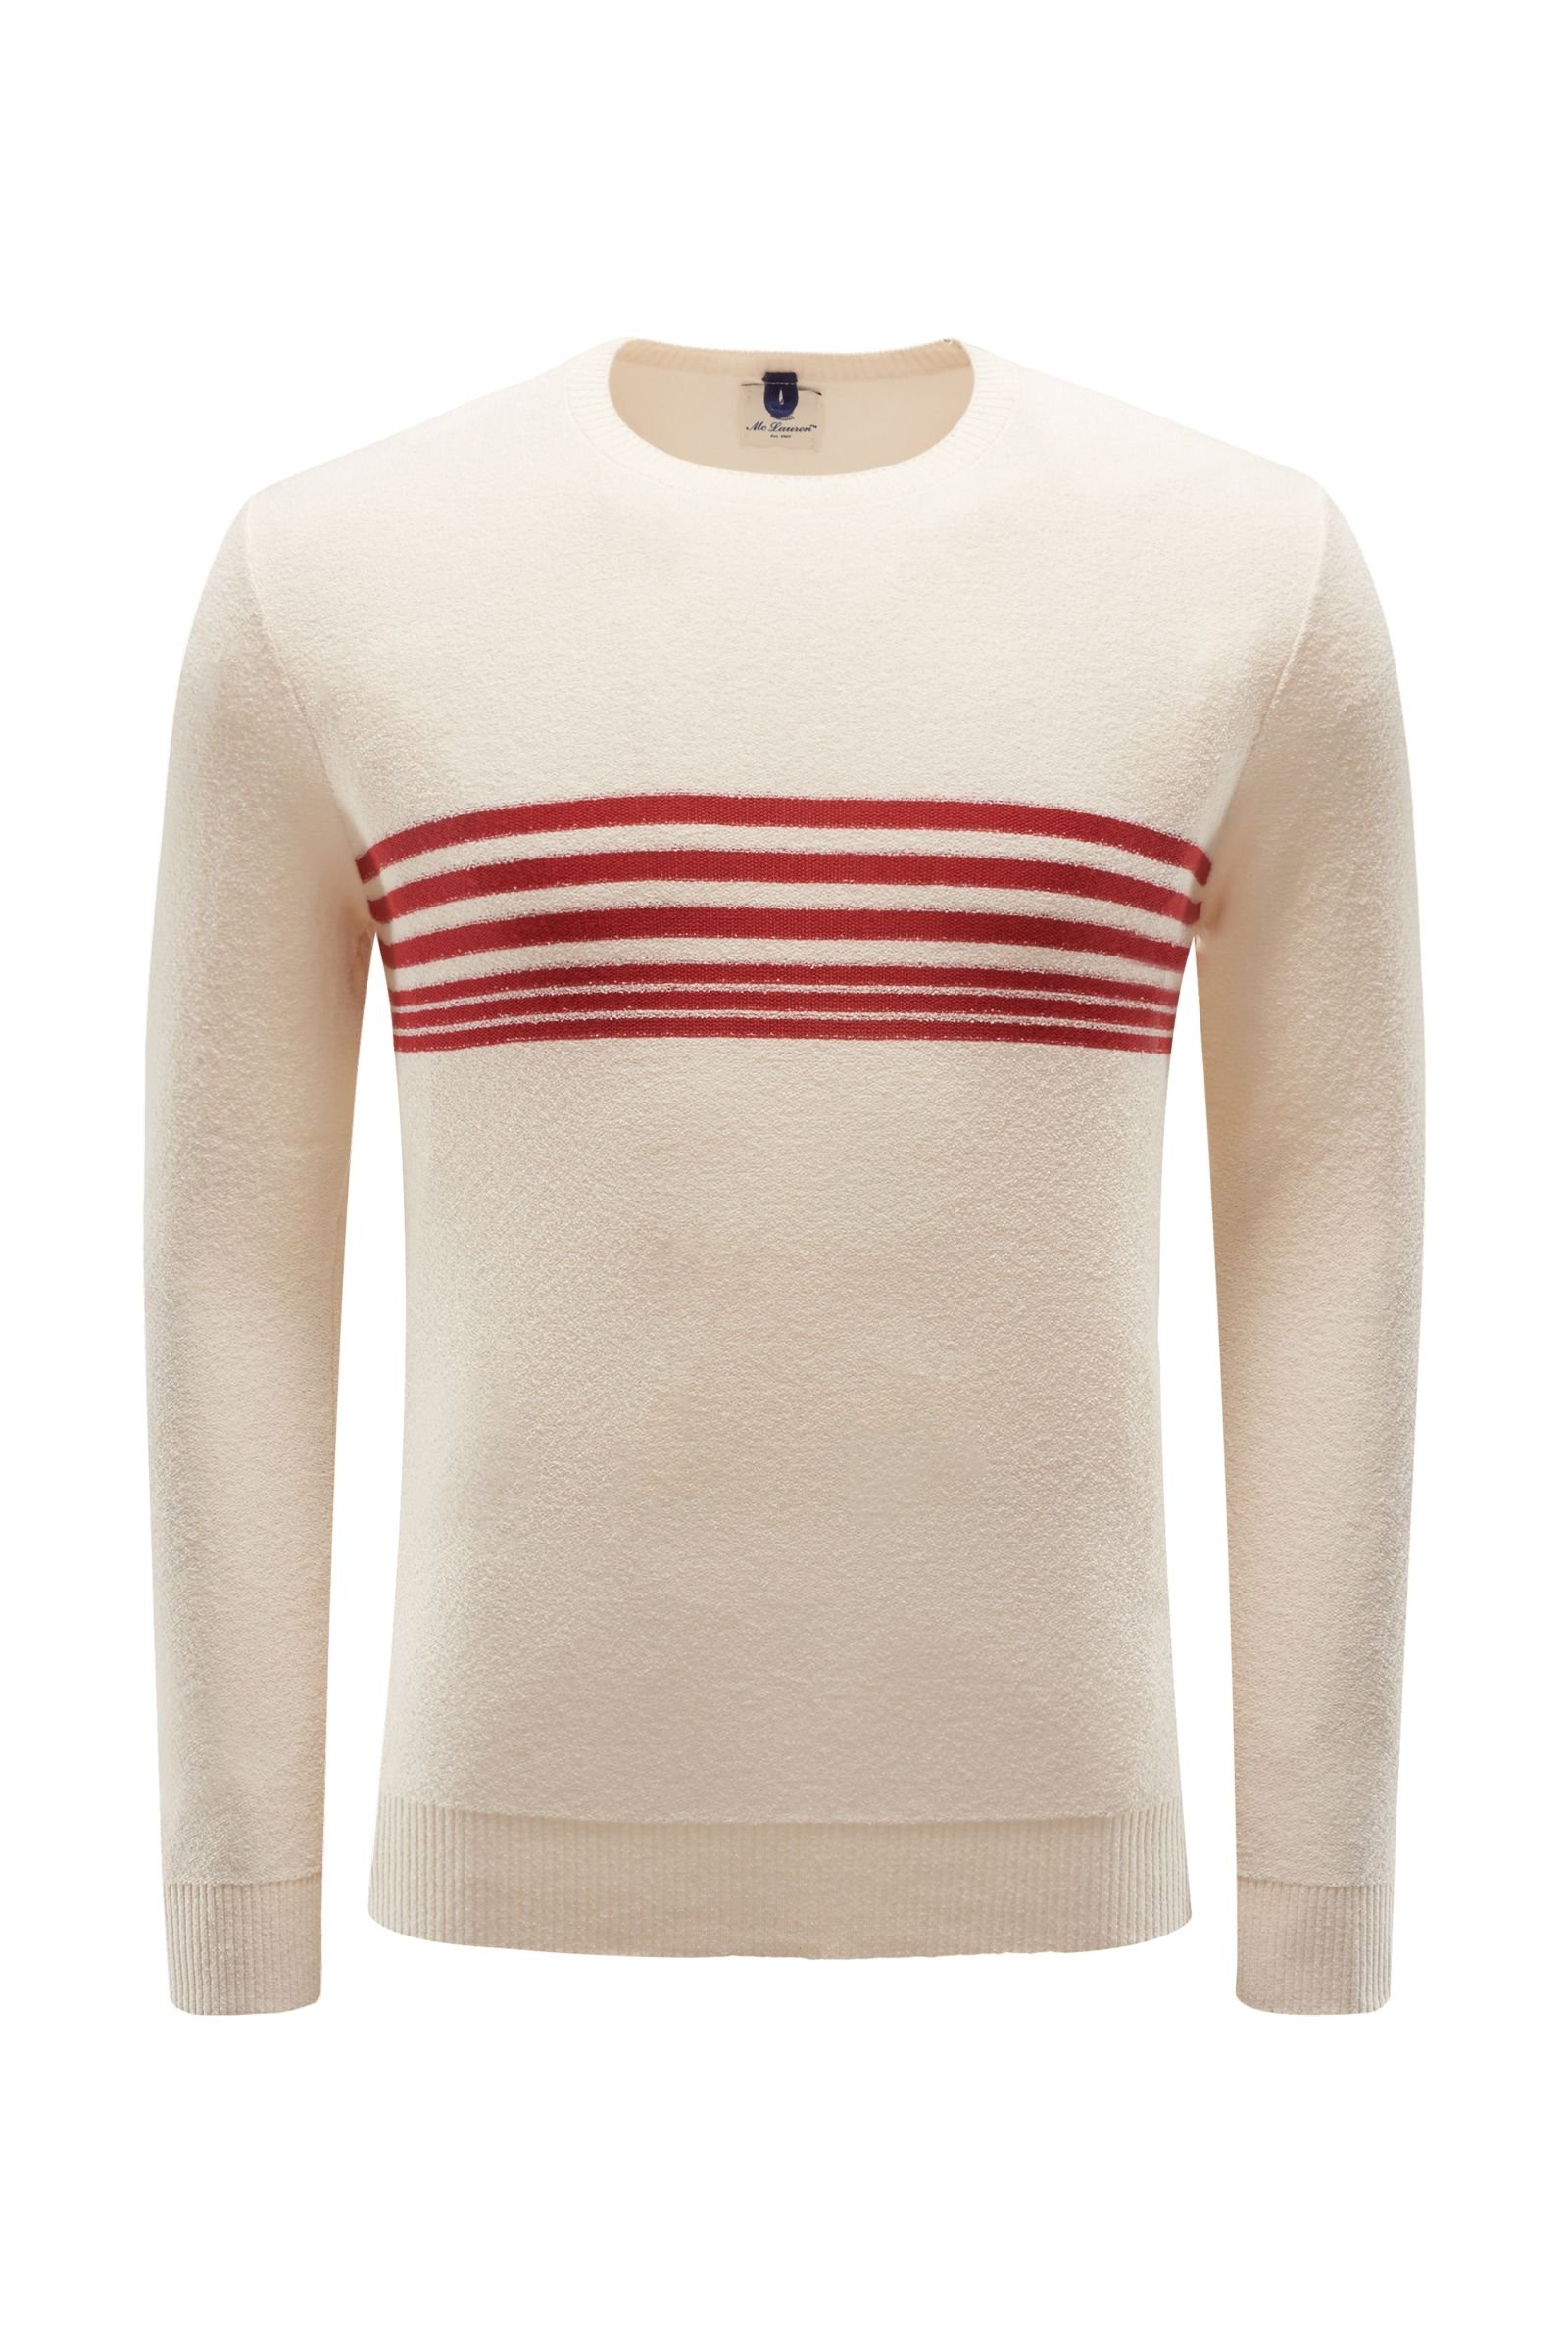 Terry crew neck jumper off-white/red